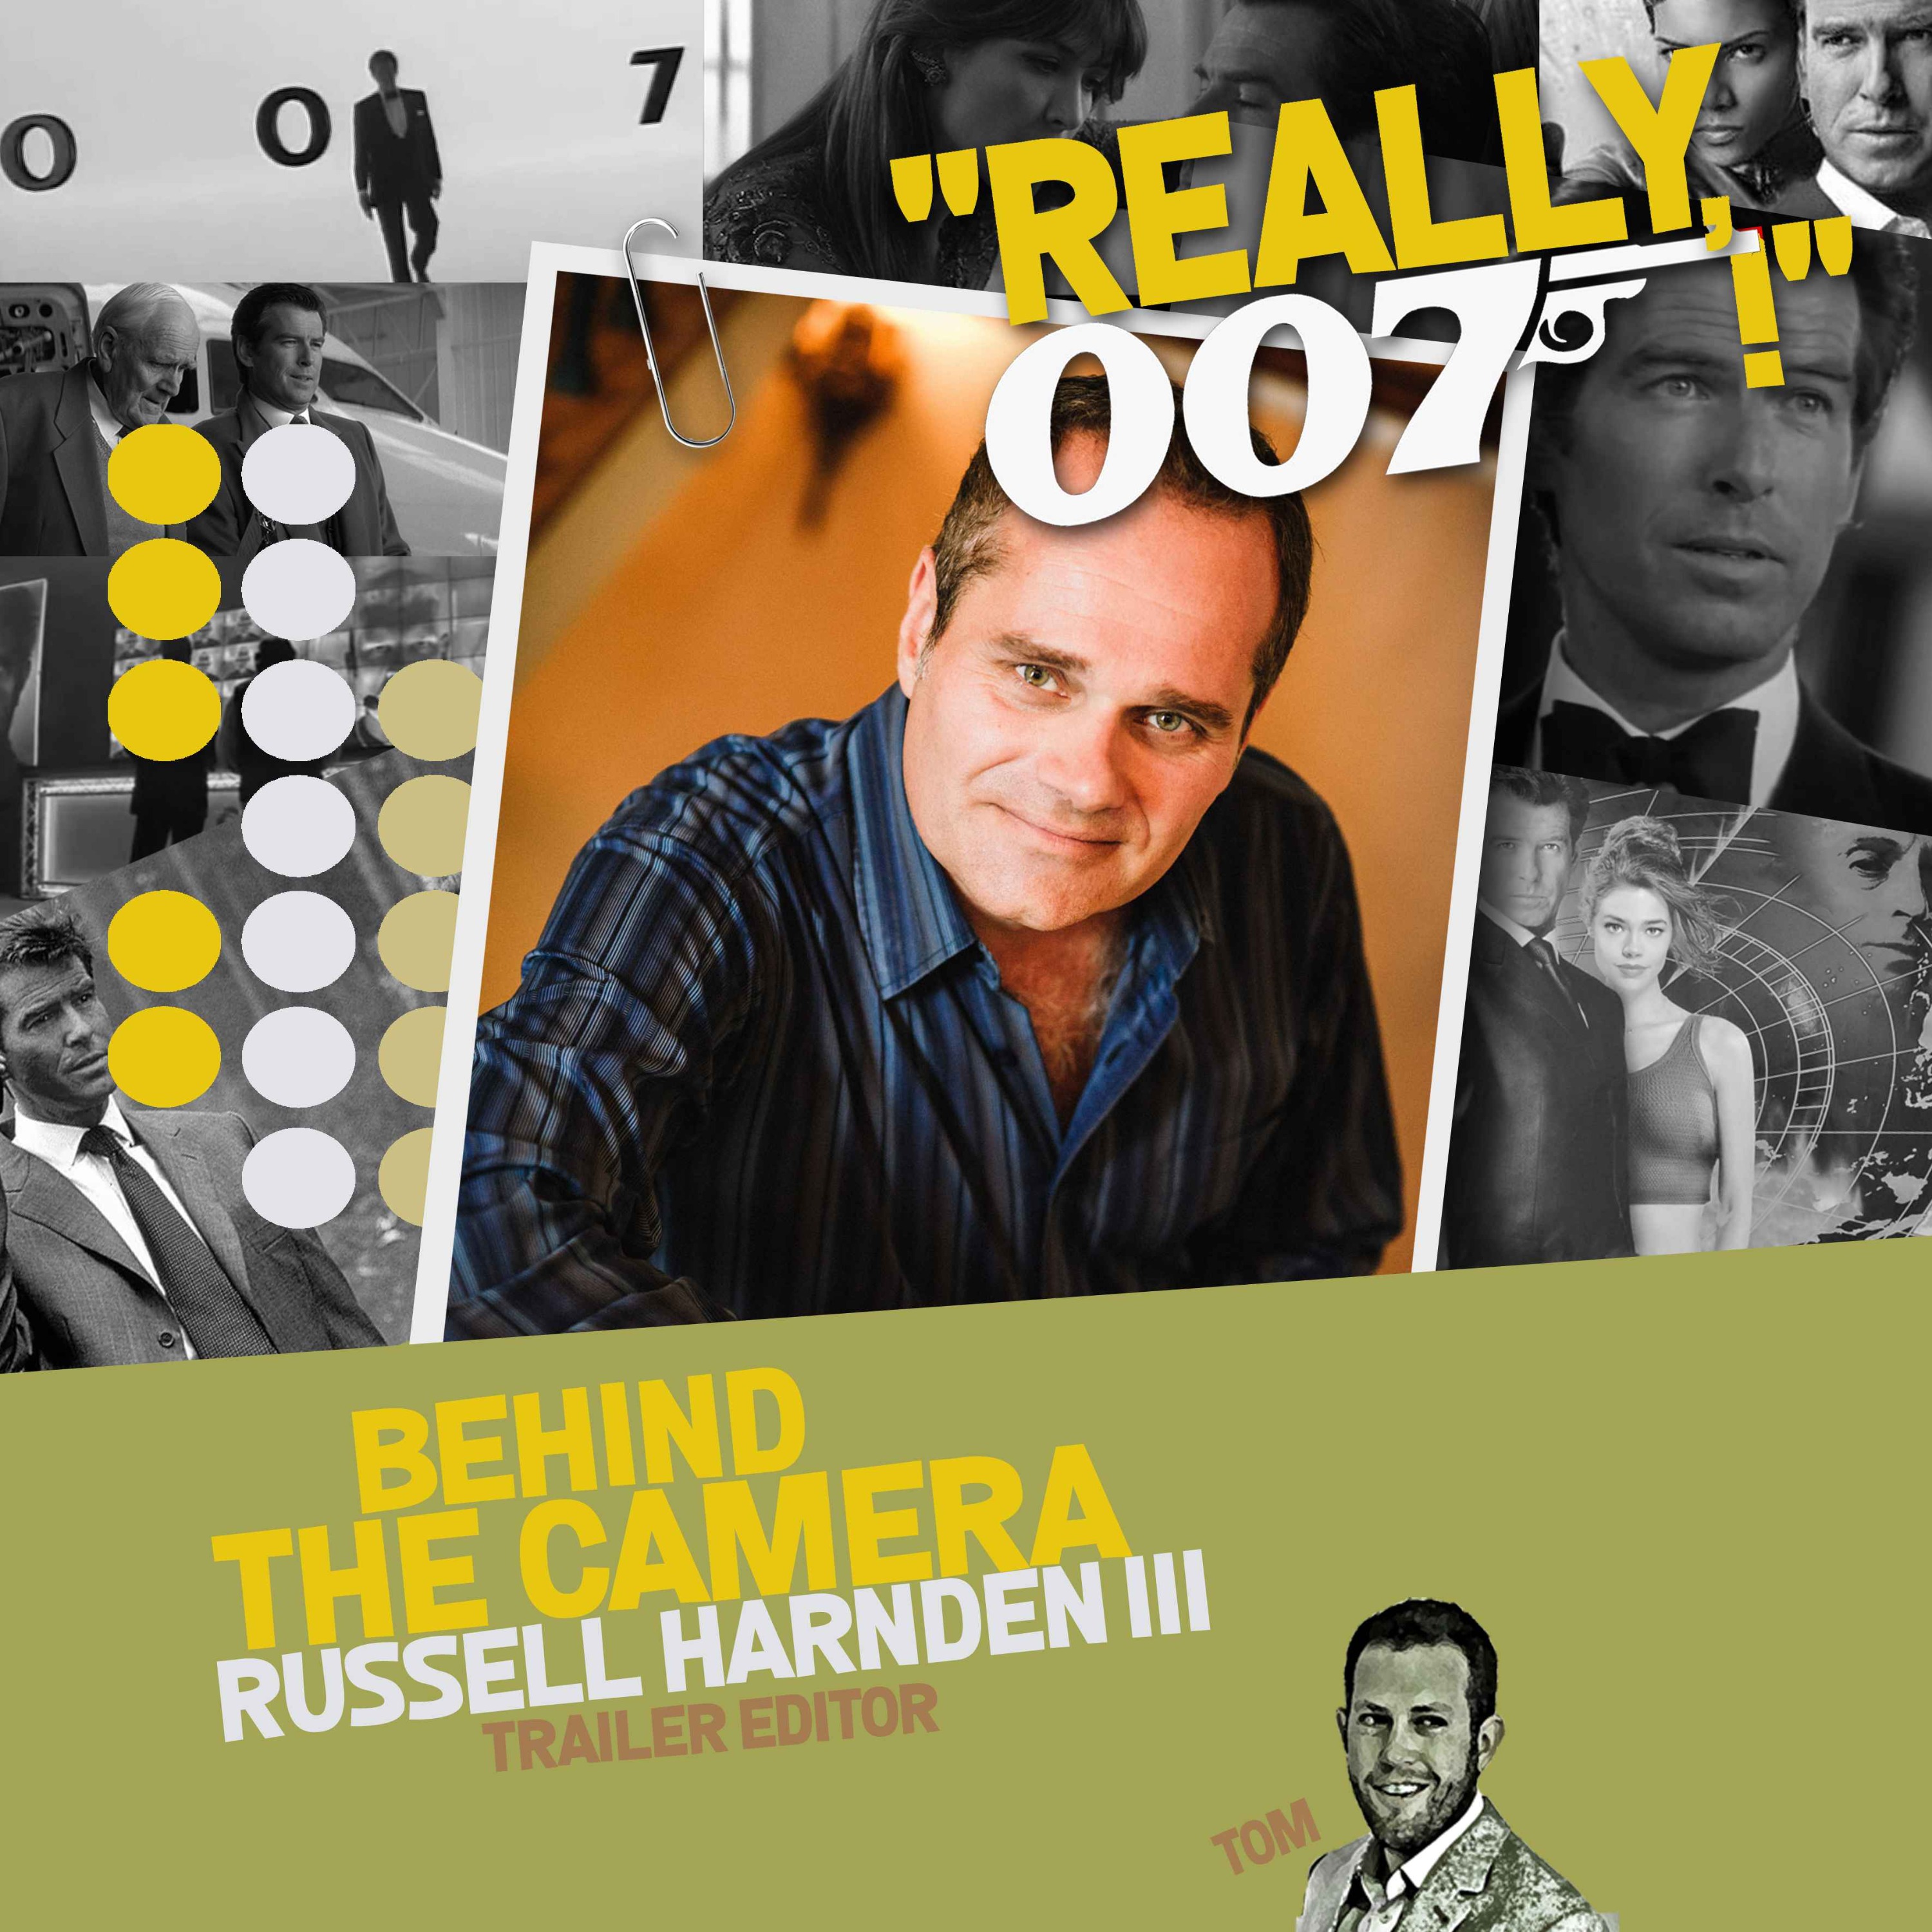 Behind The Camera - Russell Harnden III interview